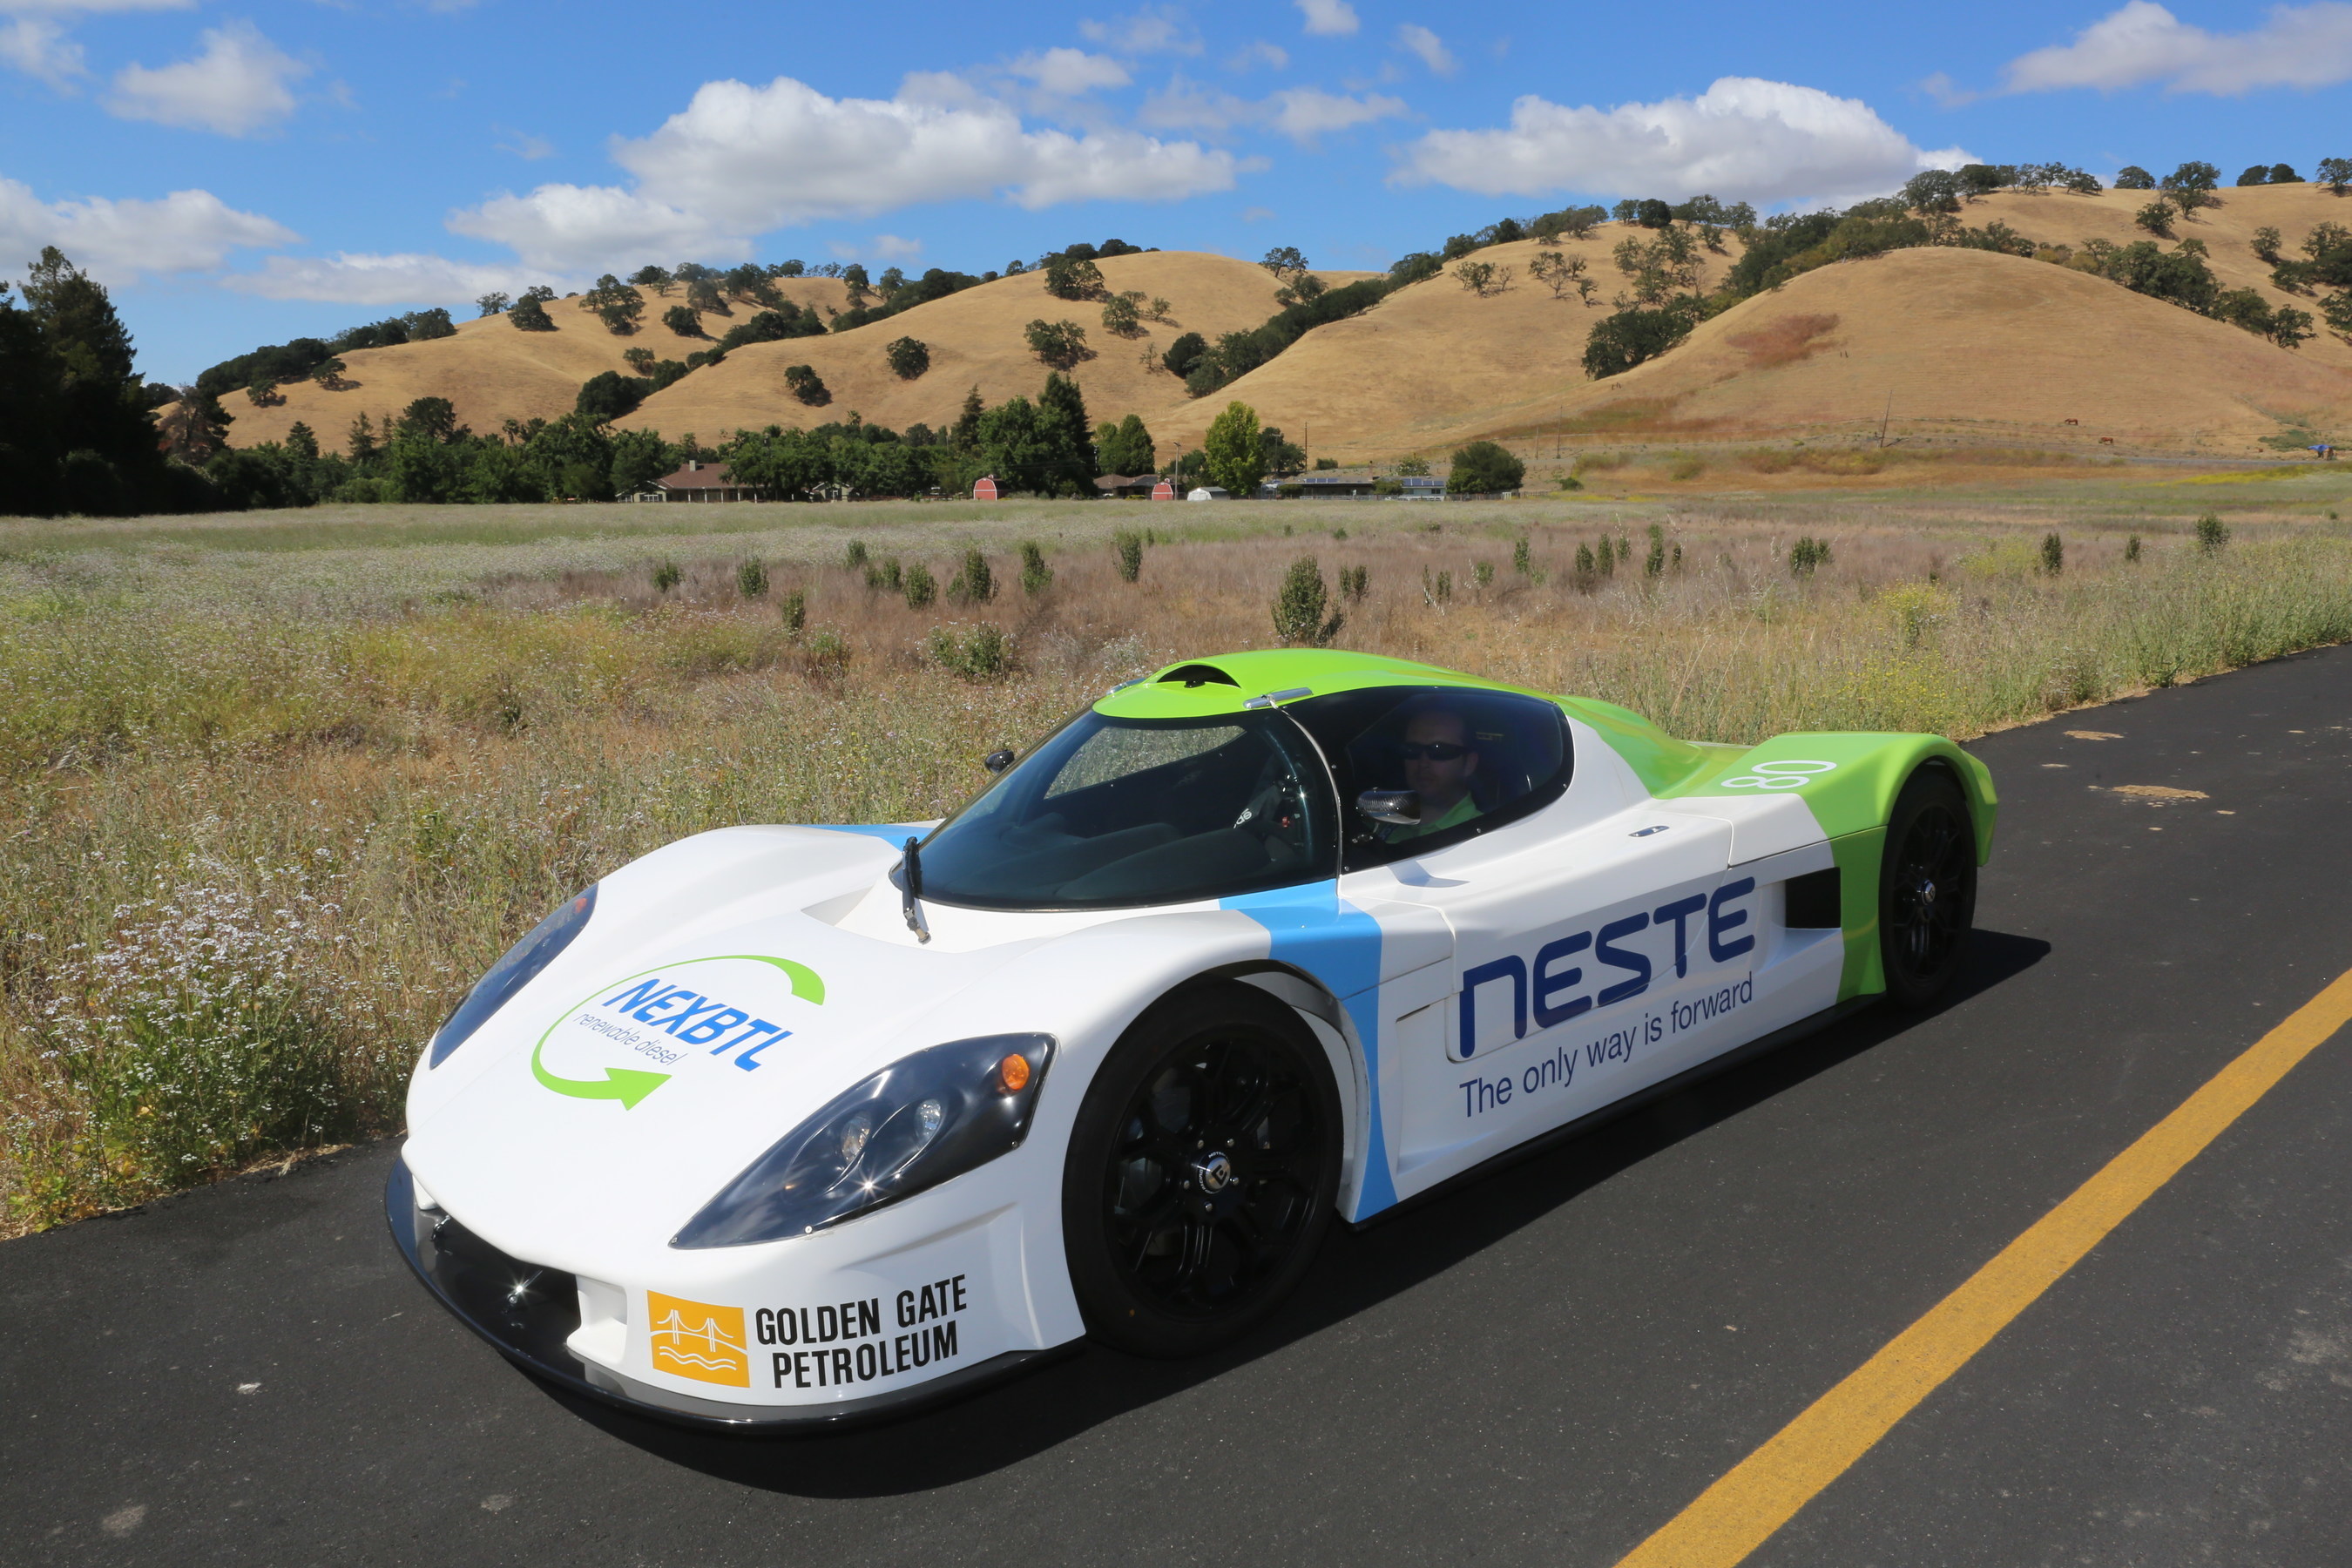 The Neste One Tank Across the USA team will drive a Superlite Coupe powered by an efficient Volkswagen diesel engine running on NEXBTL renewable diesel fuel.